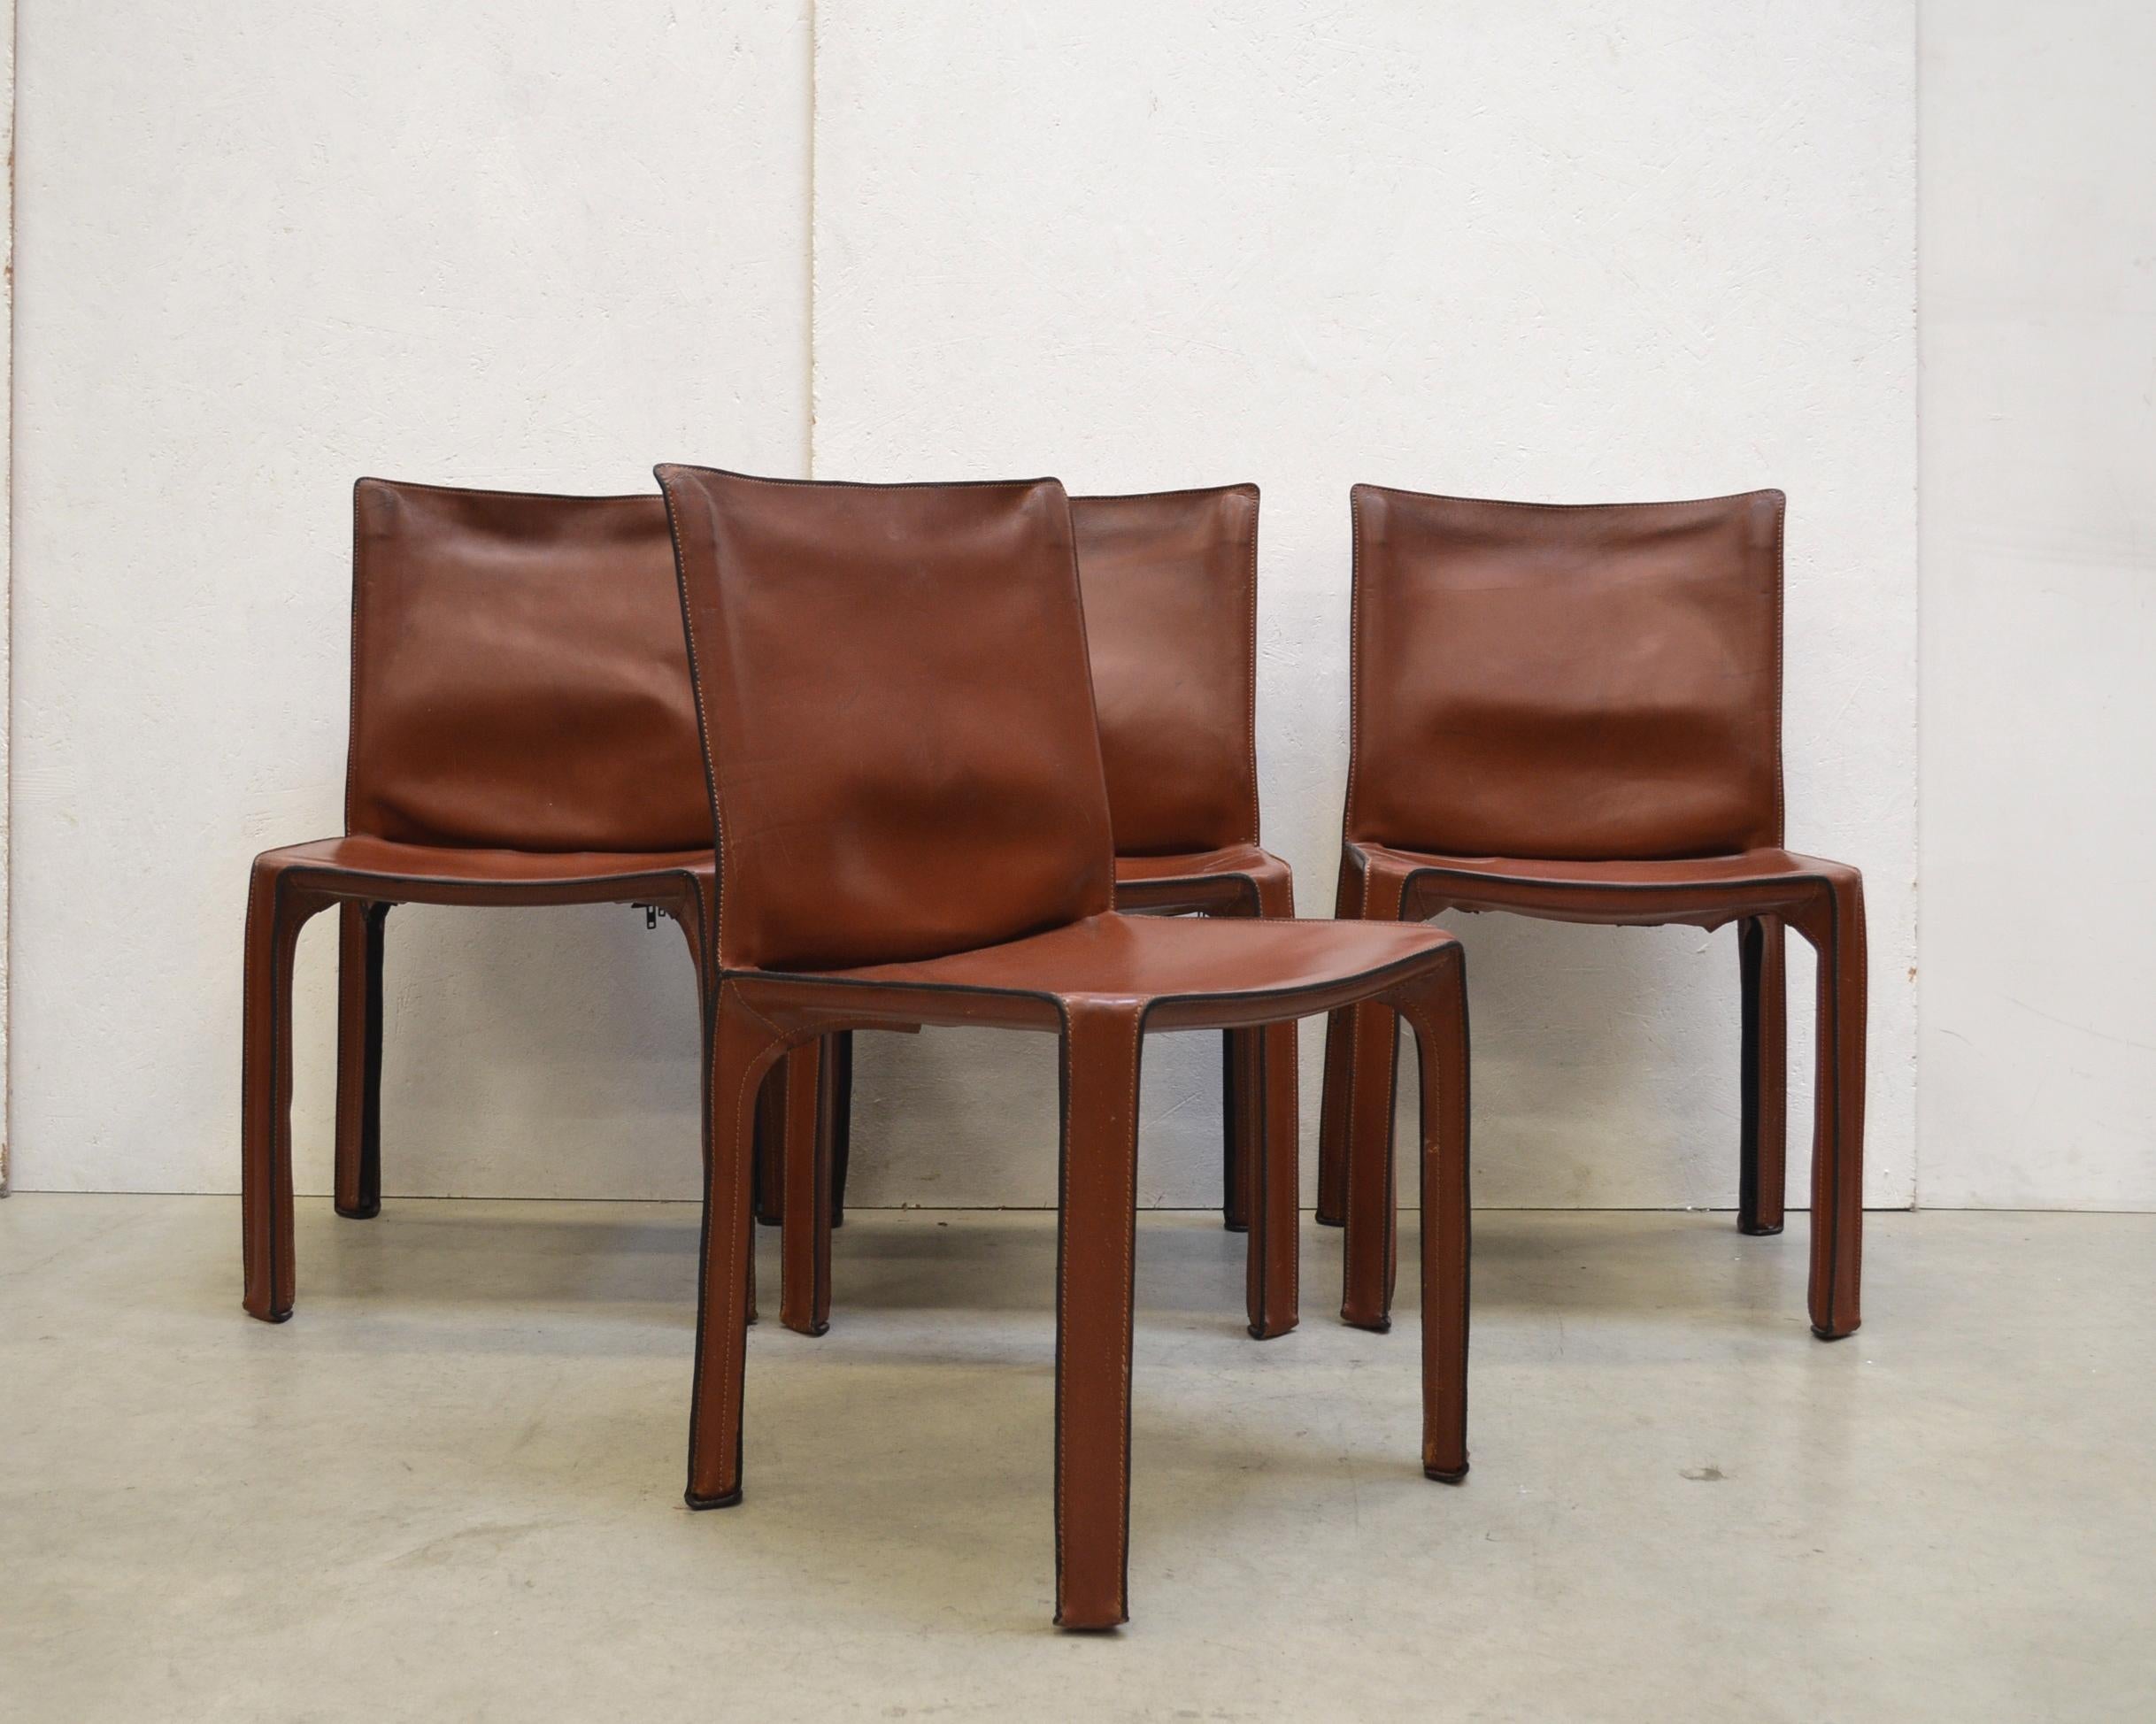 Italian Set of 4 Cab Chair 412 by Mario Bellini for Cassina Cognac Leather